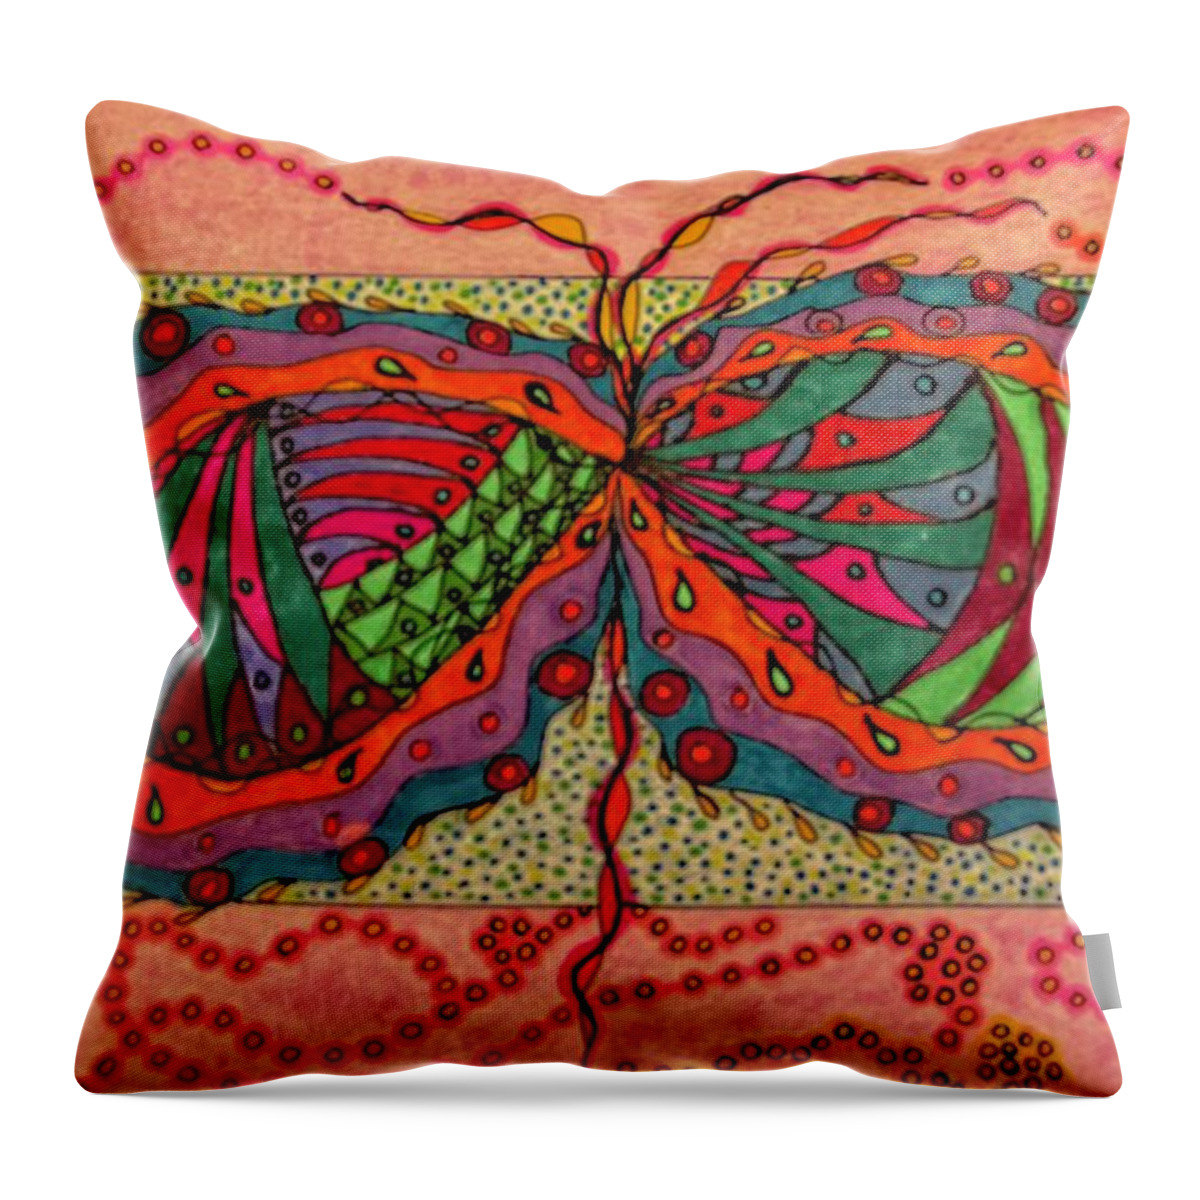 Intimate Throw Pillow featuring the drawing Intimate Infinity by Karen Nice-Webb